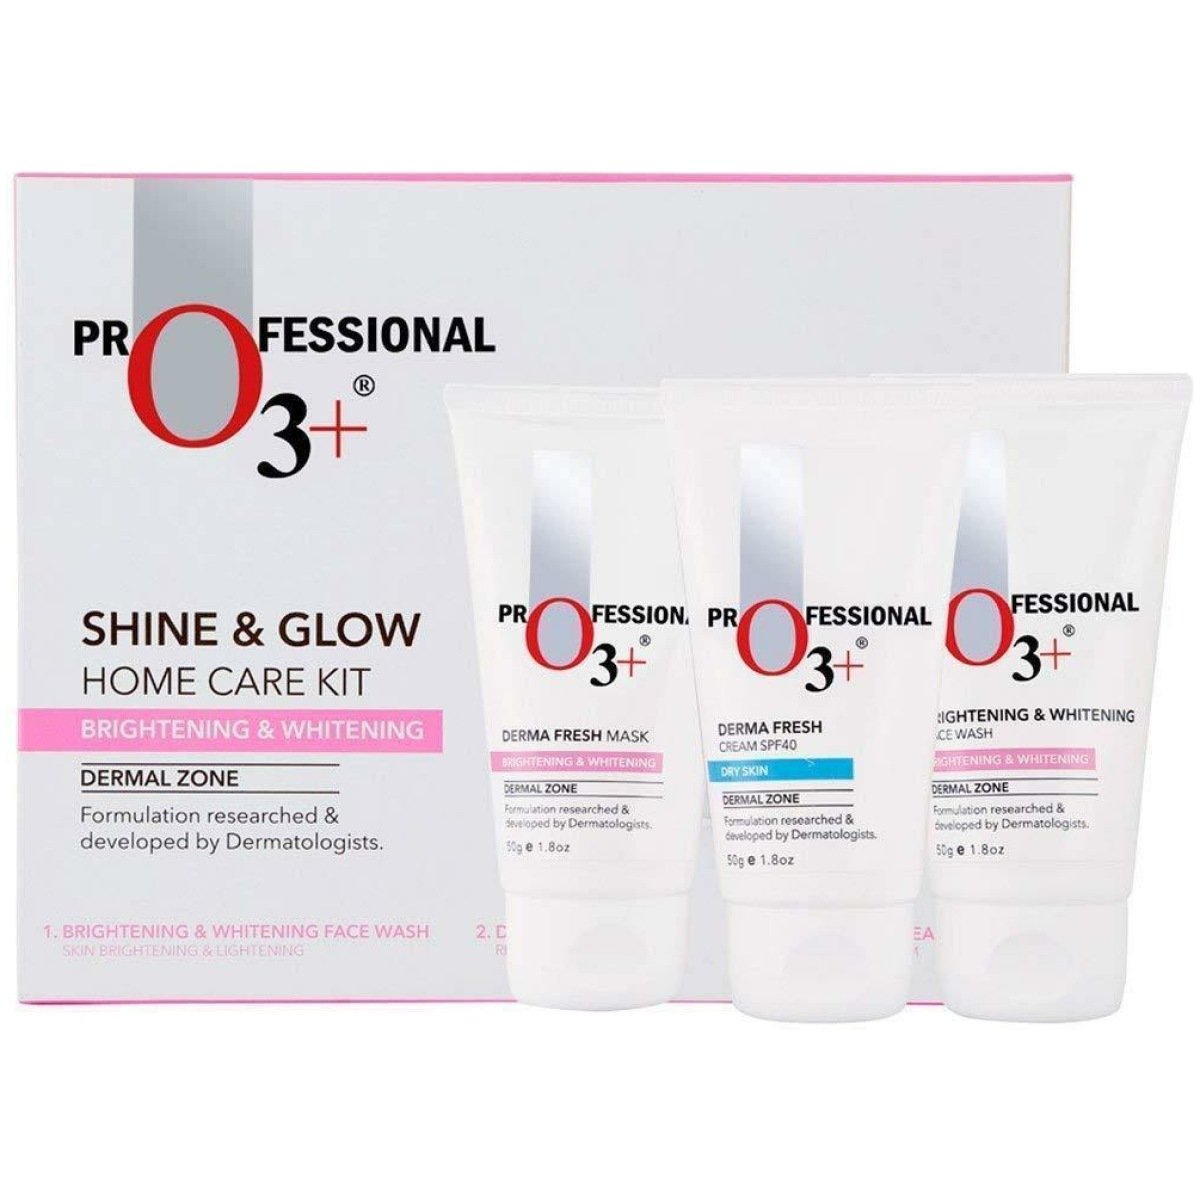 O3+ Professionel Radiant And Glowing Skin Bridal Facial Kit